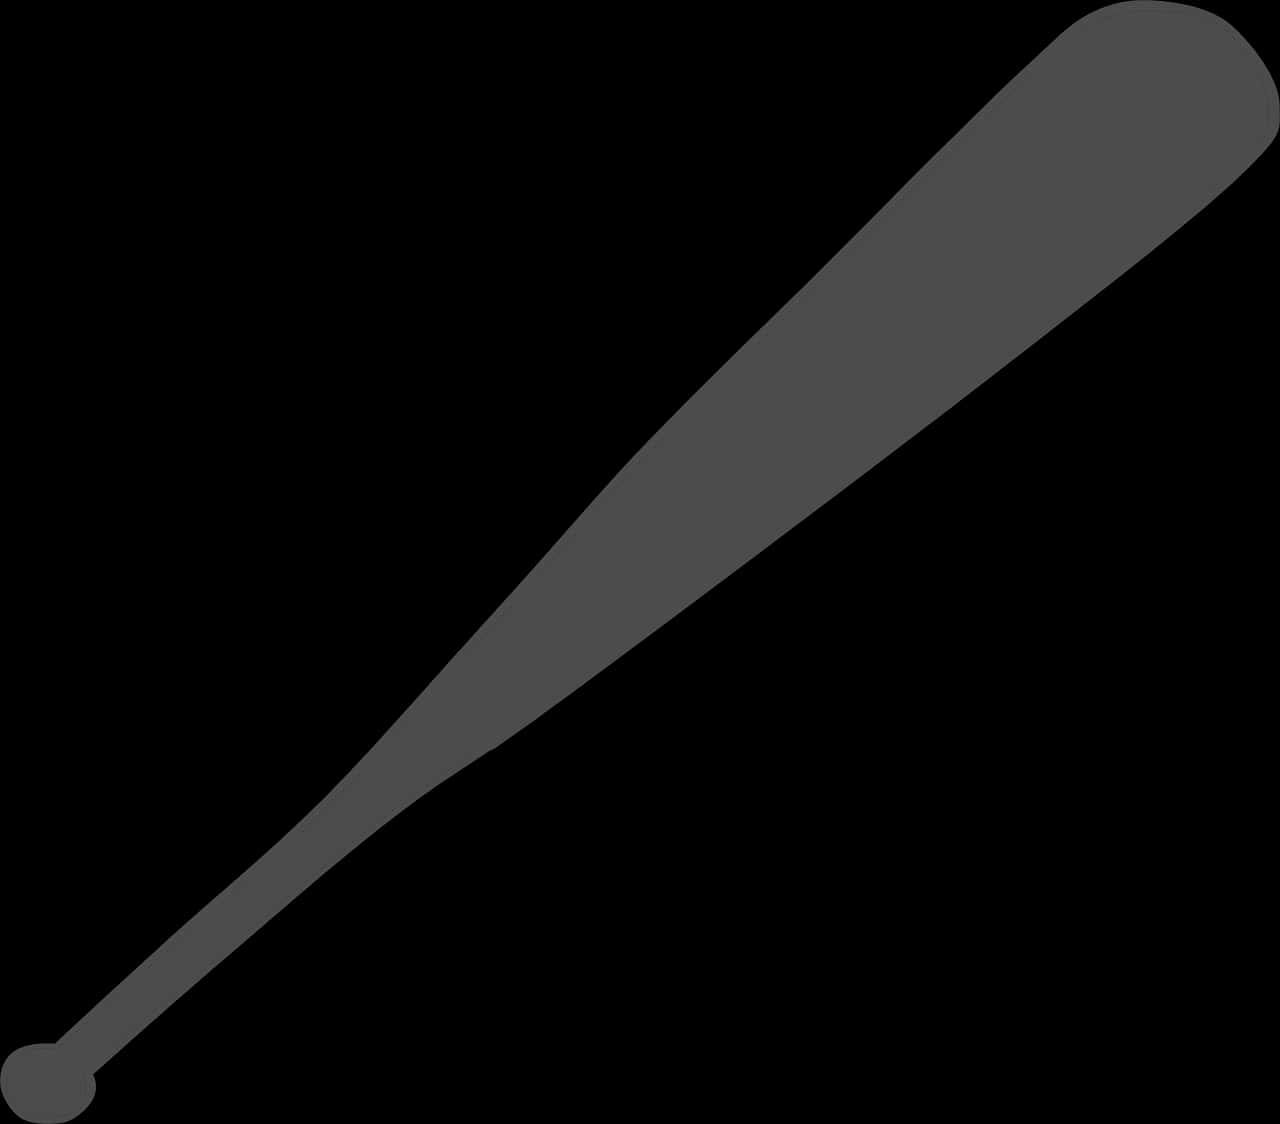 A Black And White Picture Of A Baseball Bat